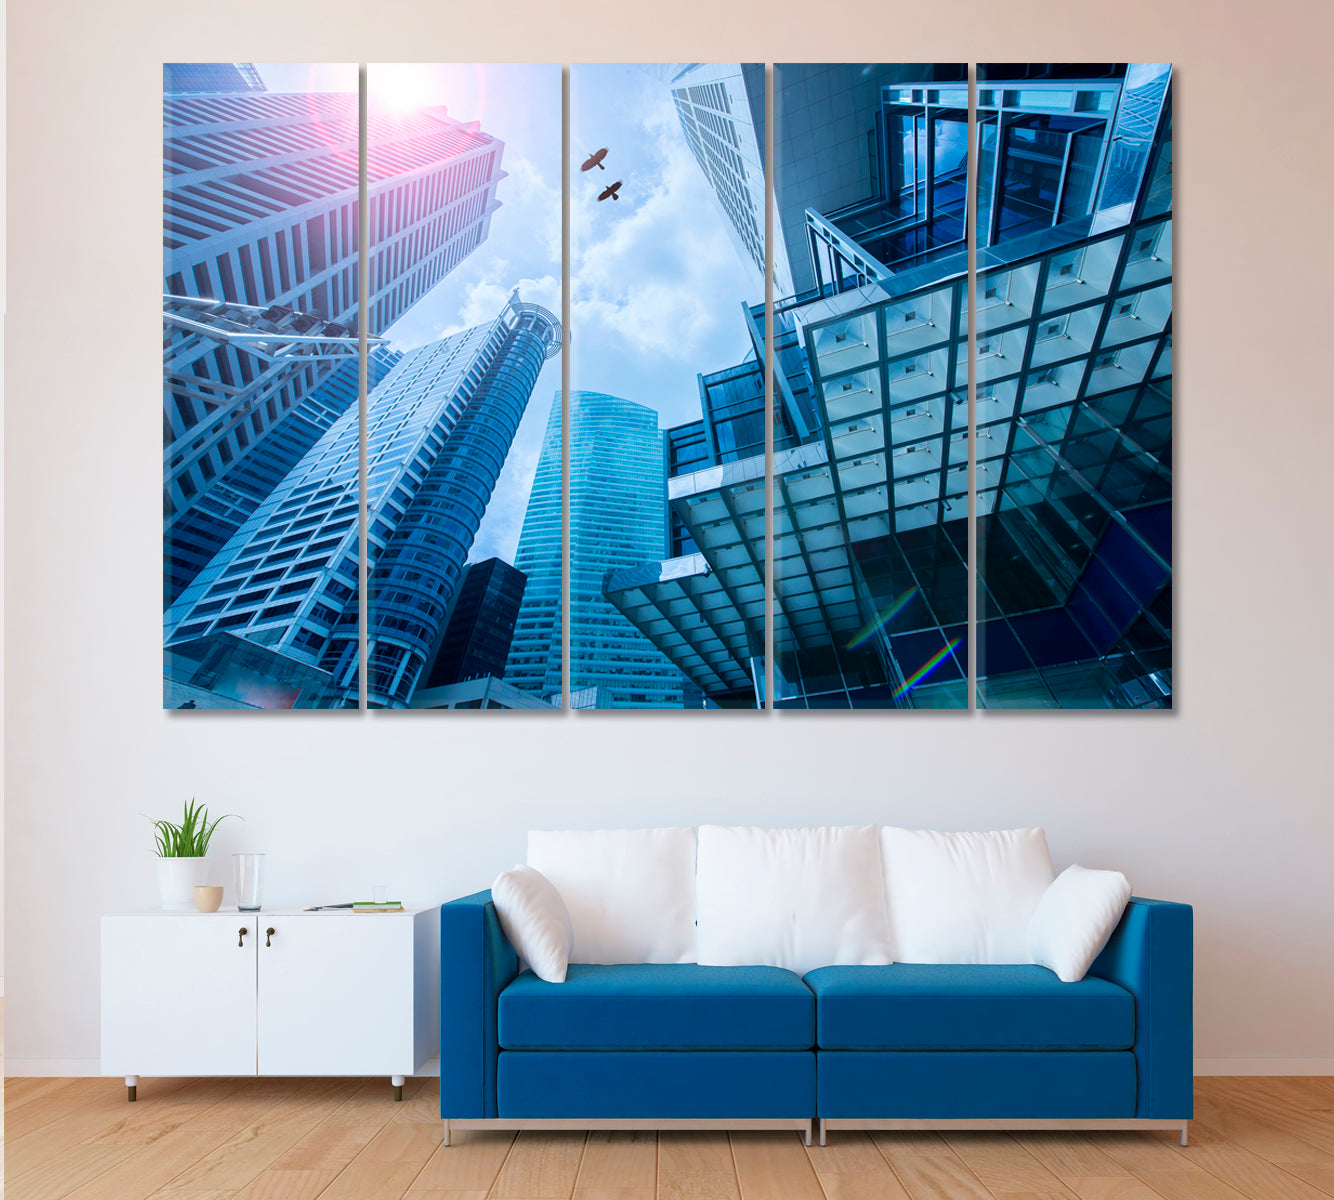 Singapore Skyscrapers Canvas Print ArtLexy 5 Panels 36"x24" inches 